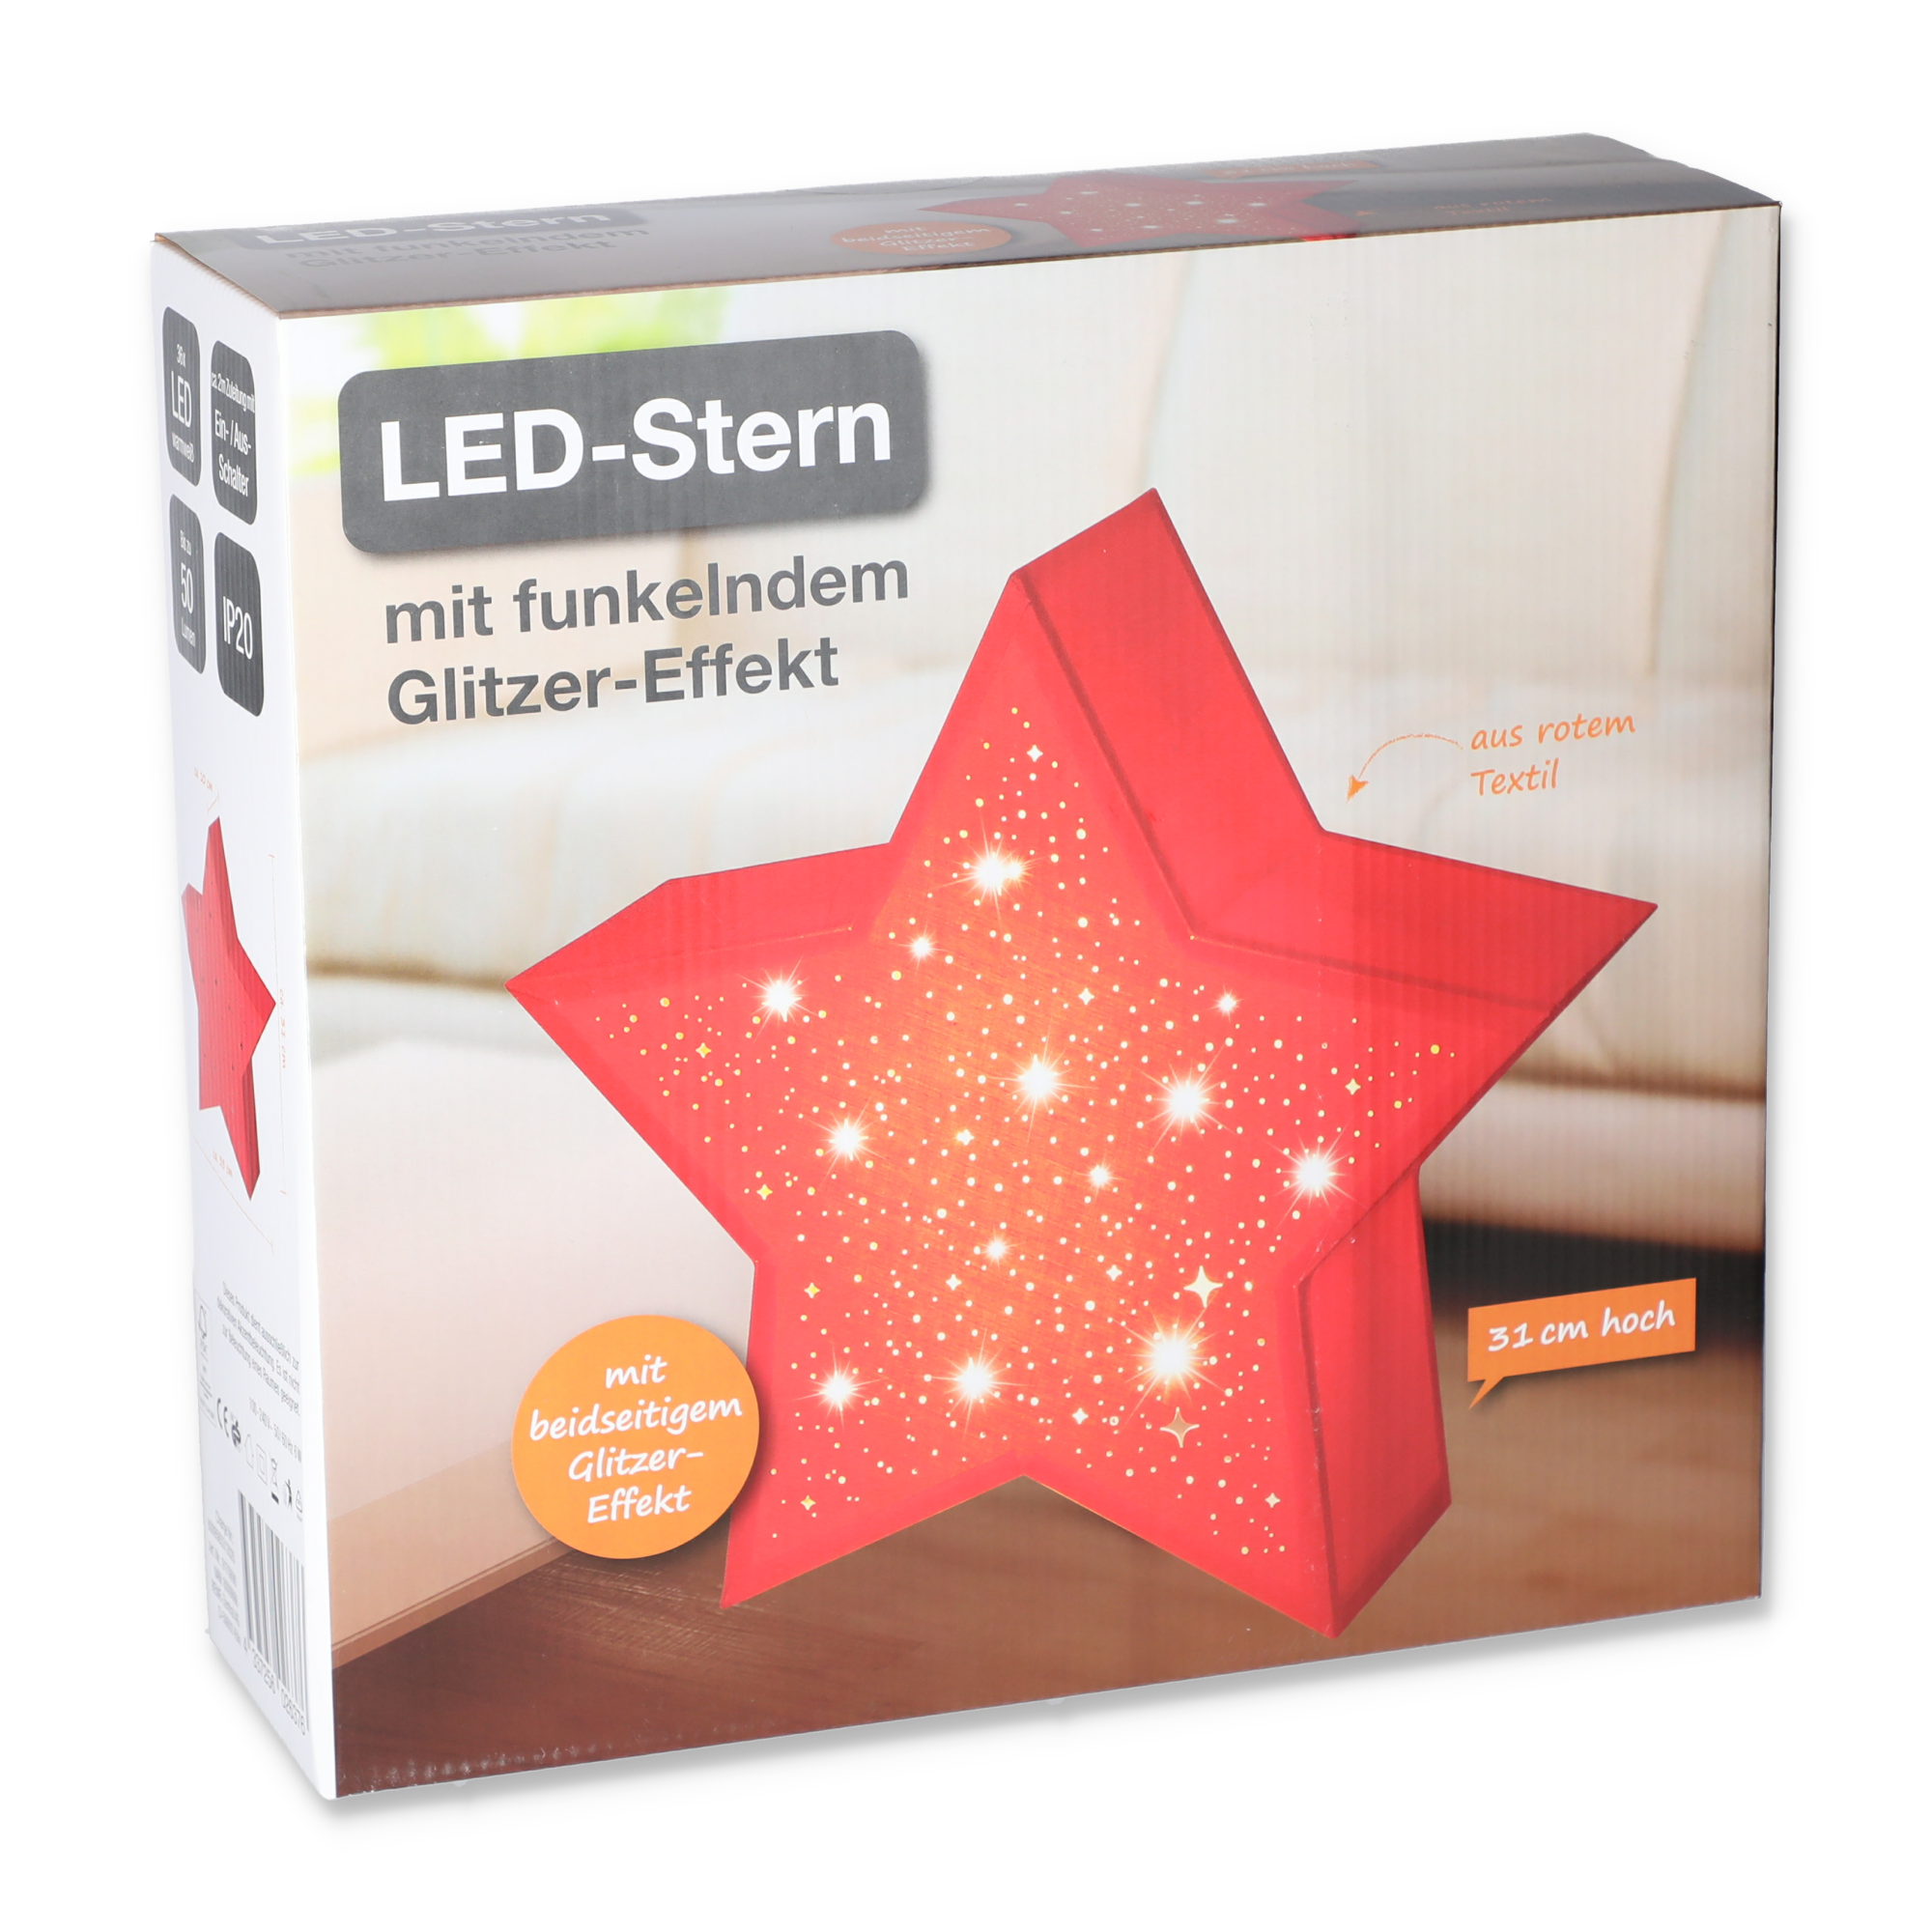 LED-Leuchtstern Textil rot 31 x 33 cm + product picture